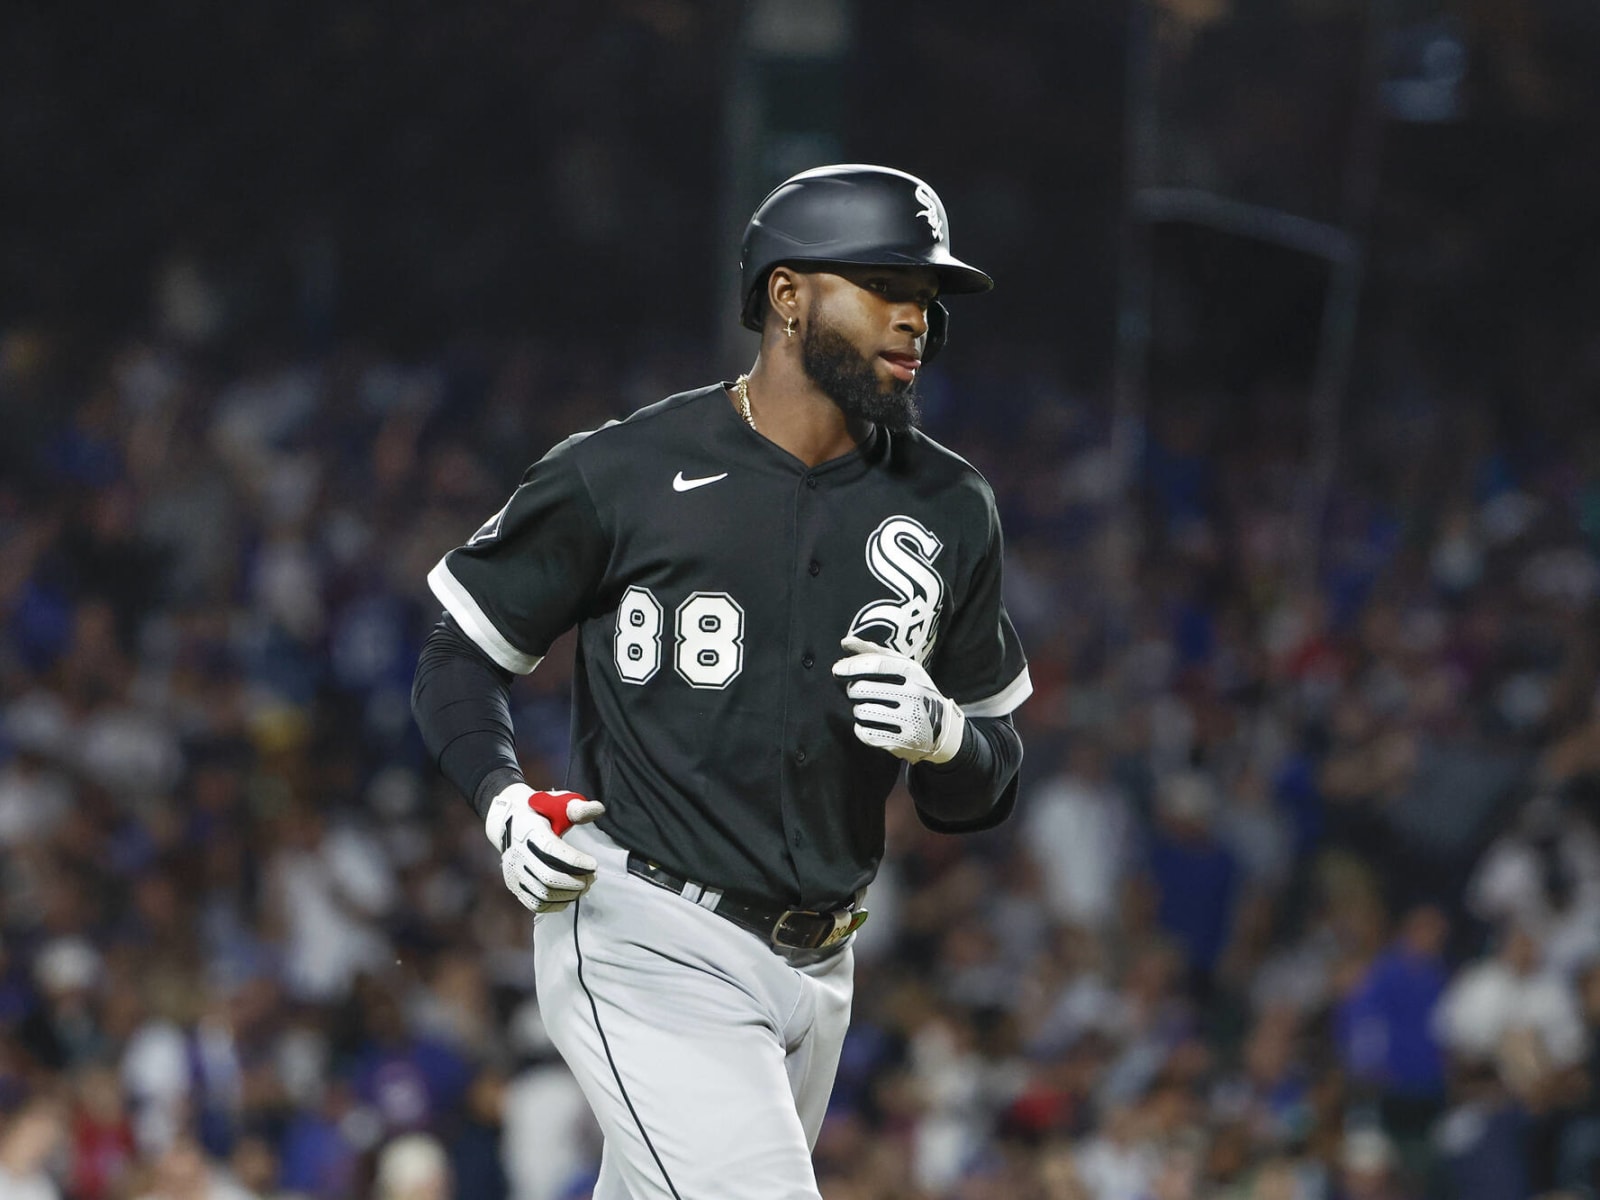 White Sox Steal a Win over the Chicago Cubs at Wrigley